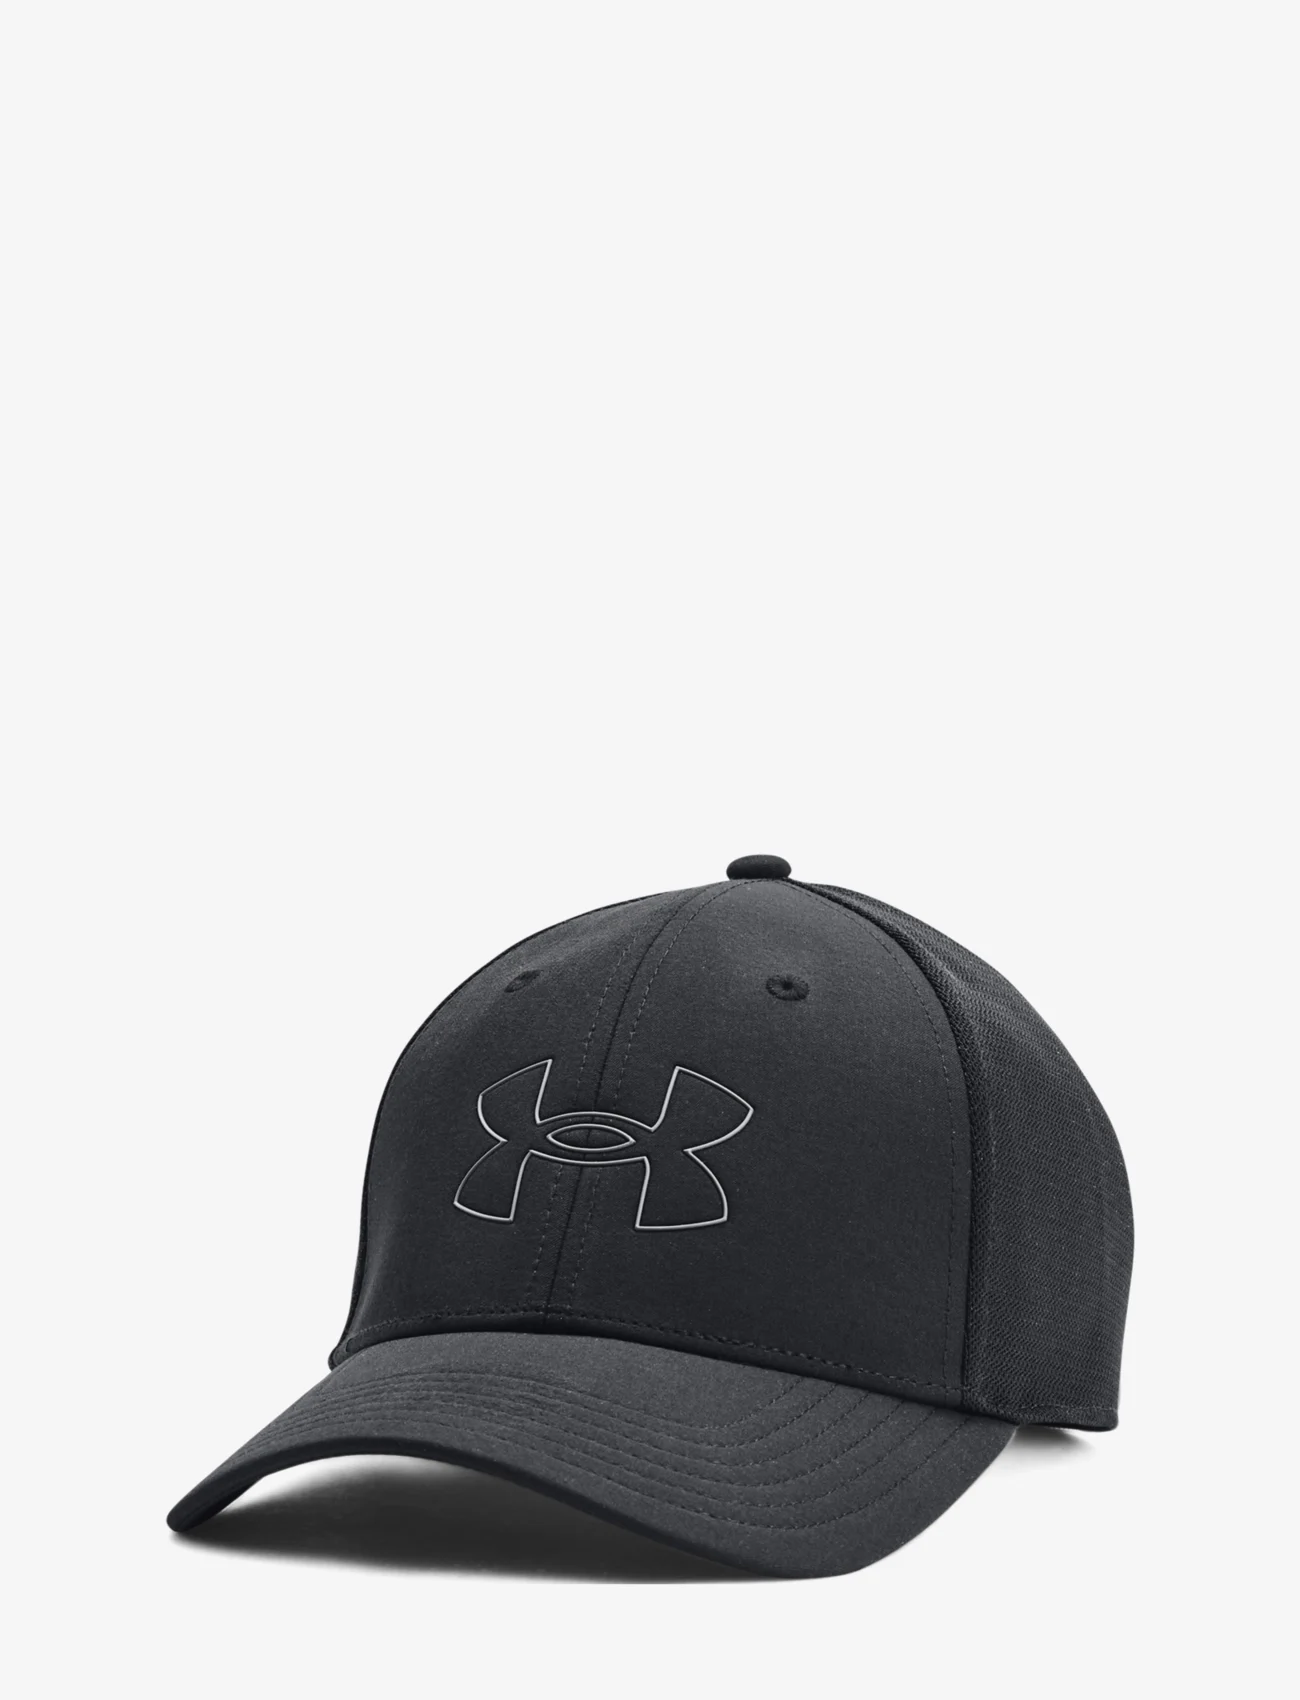 Under Armour - Iso-chill Driver Mesh Adj - black - 0